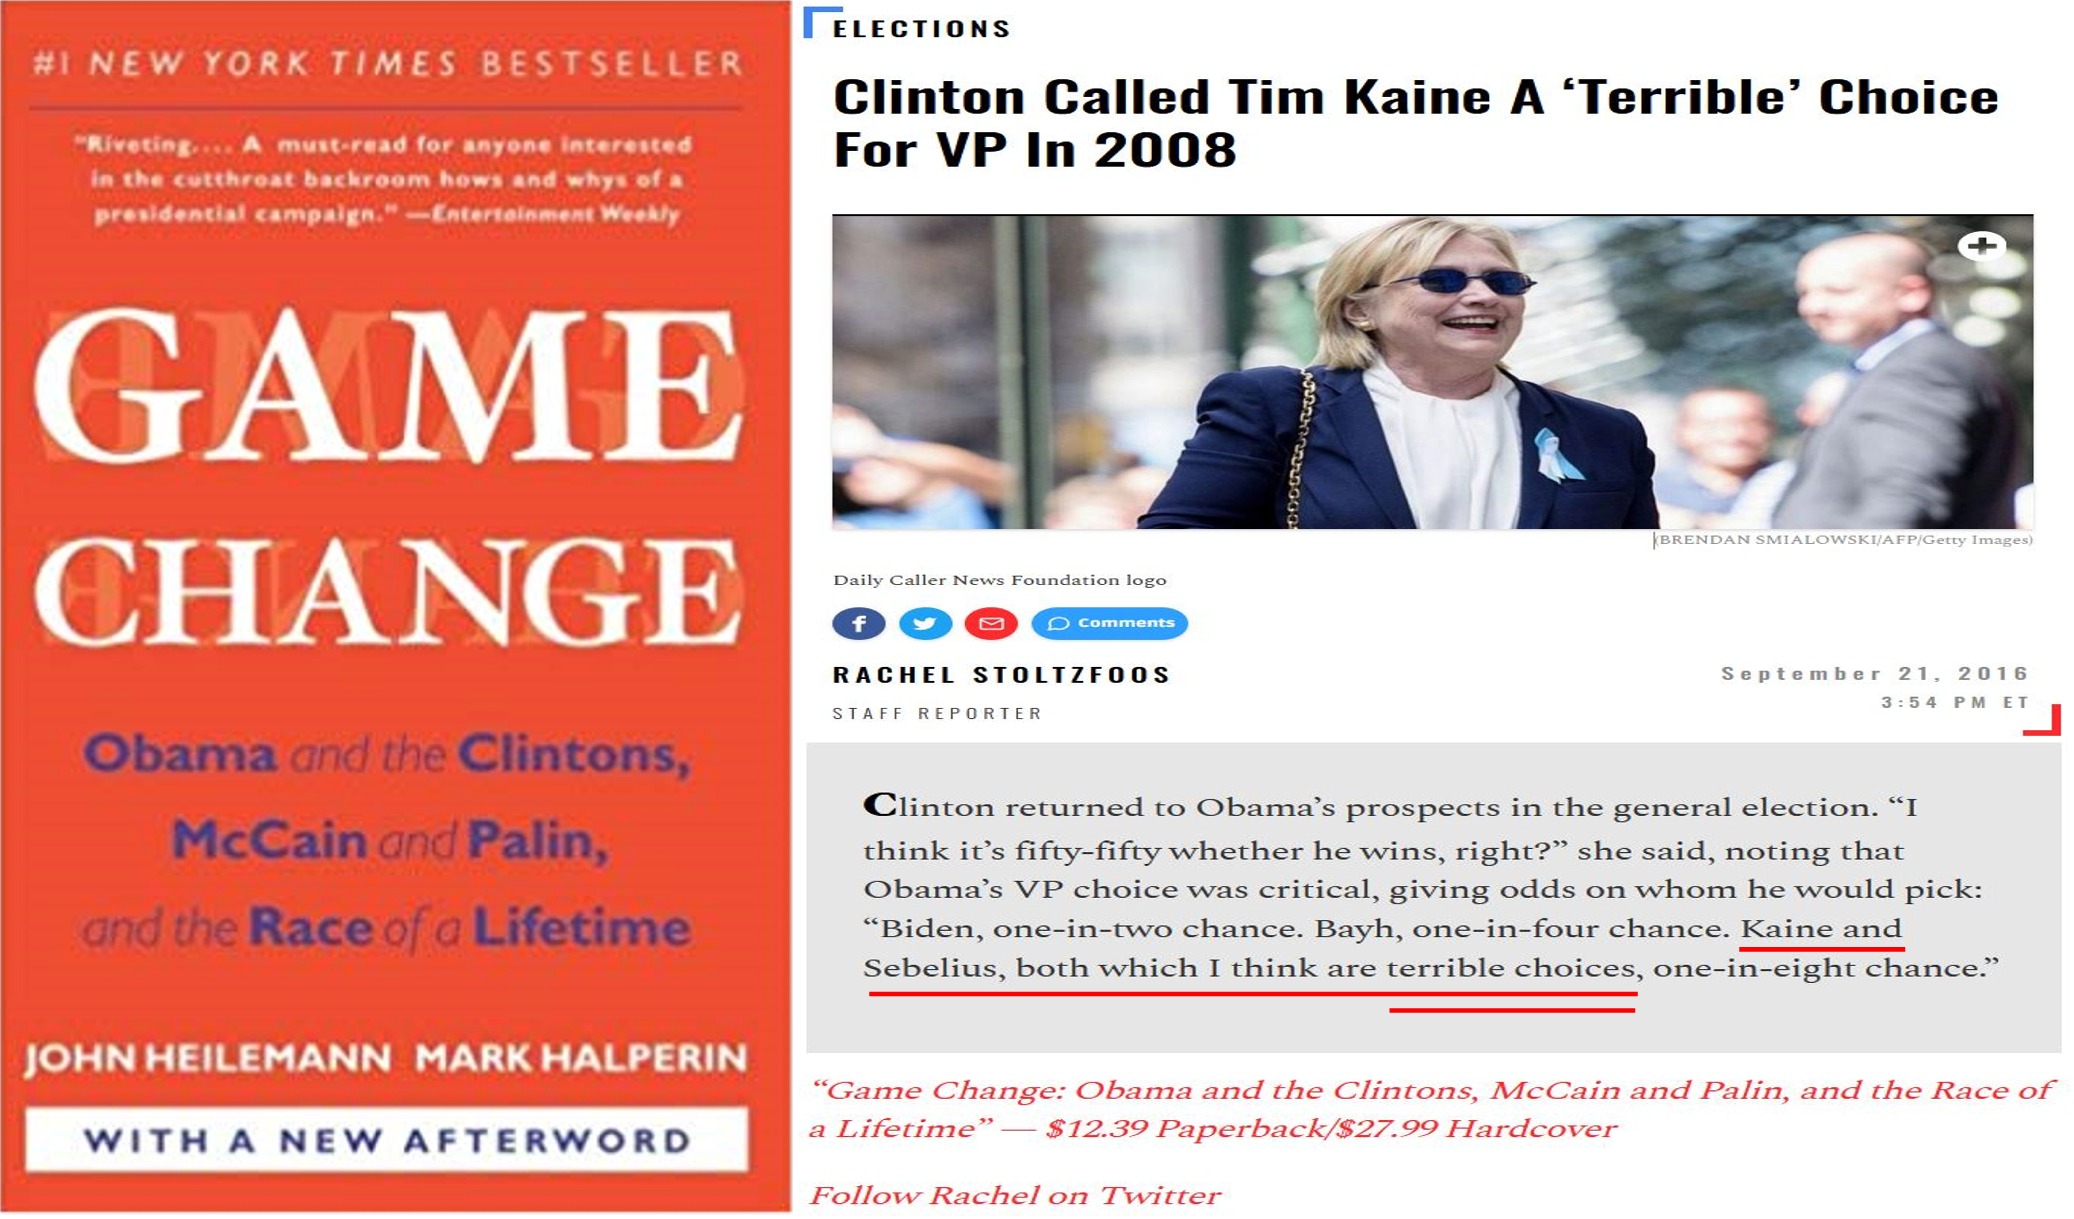 conversation - I New York Times Bestseller Elections Clinton Called Tim Kaine A 'Terrible' Choice For Vp In 2008 A read for anyone Game Change D ate de logo Oo Rachel Stoltzfoos Stepose Obama and the Clintons, McCain and Palin, and the Race of a Lifetime 